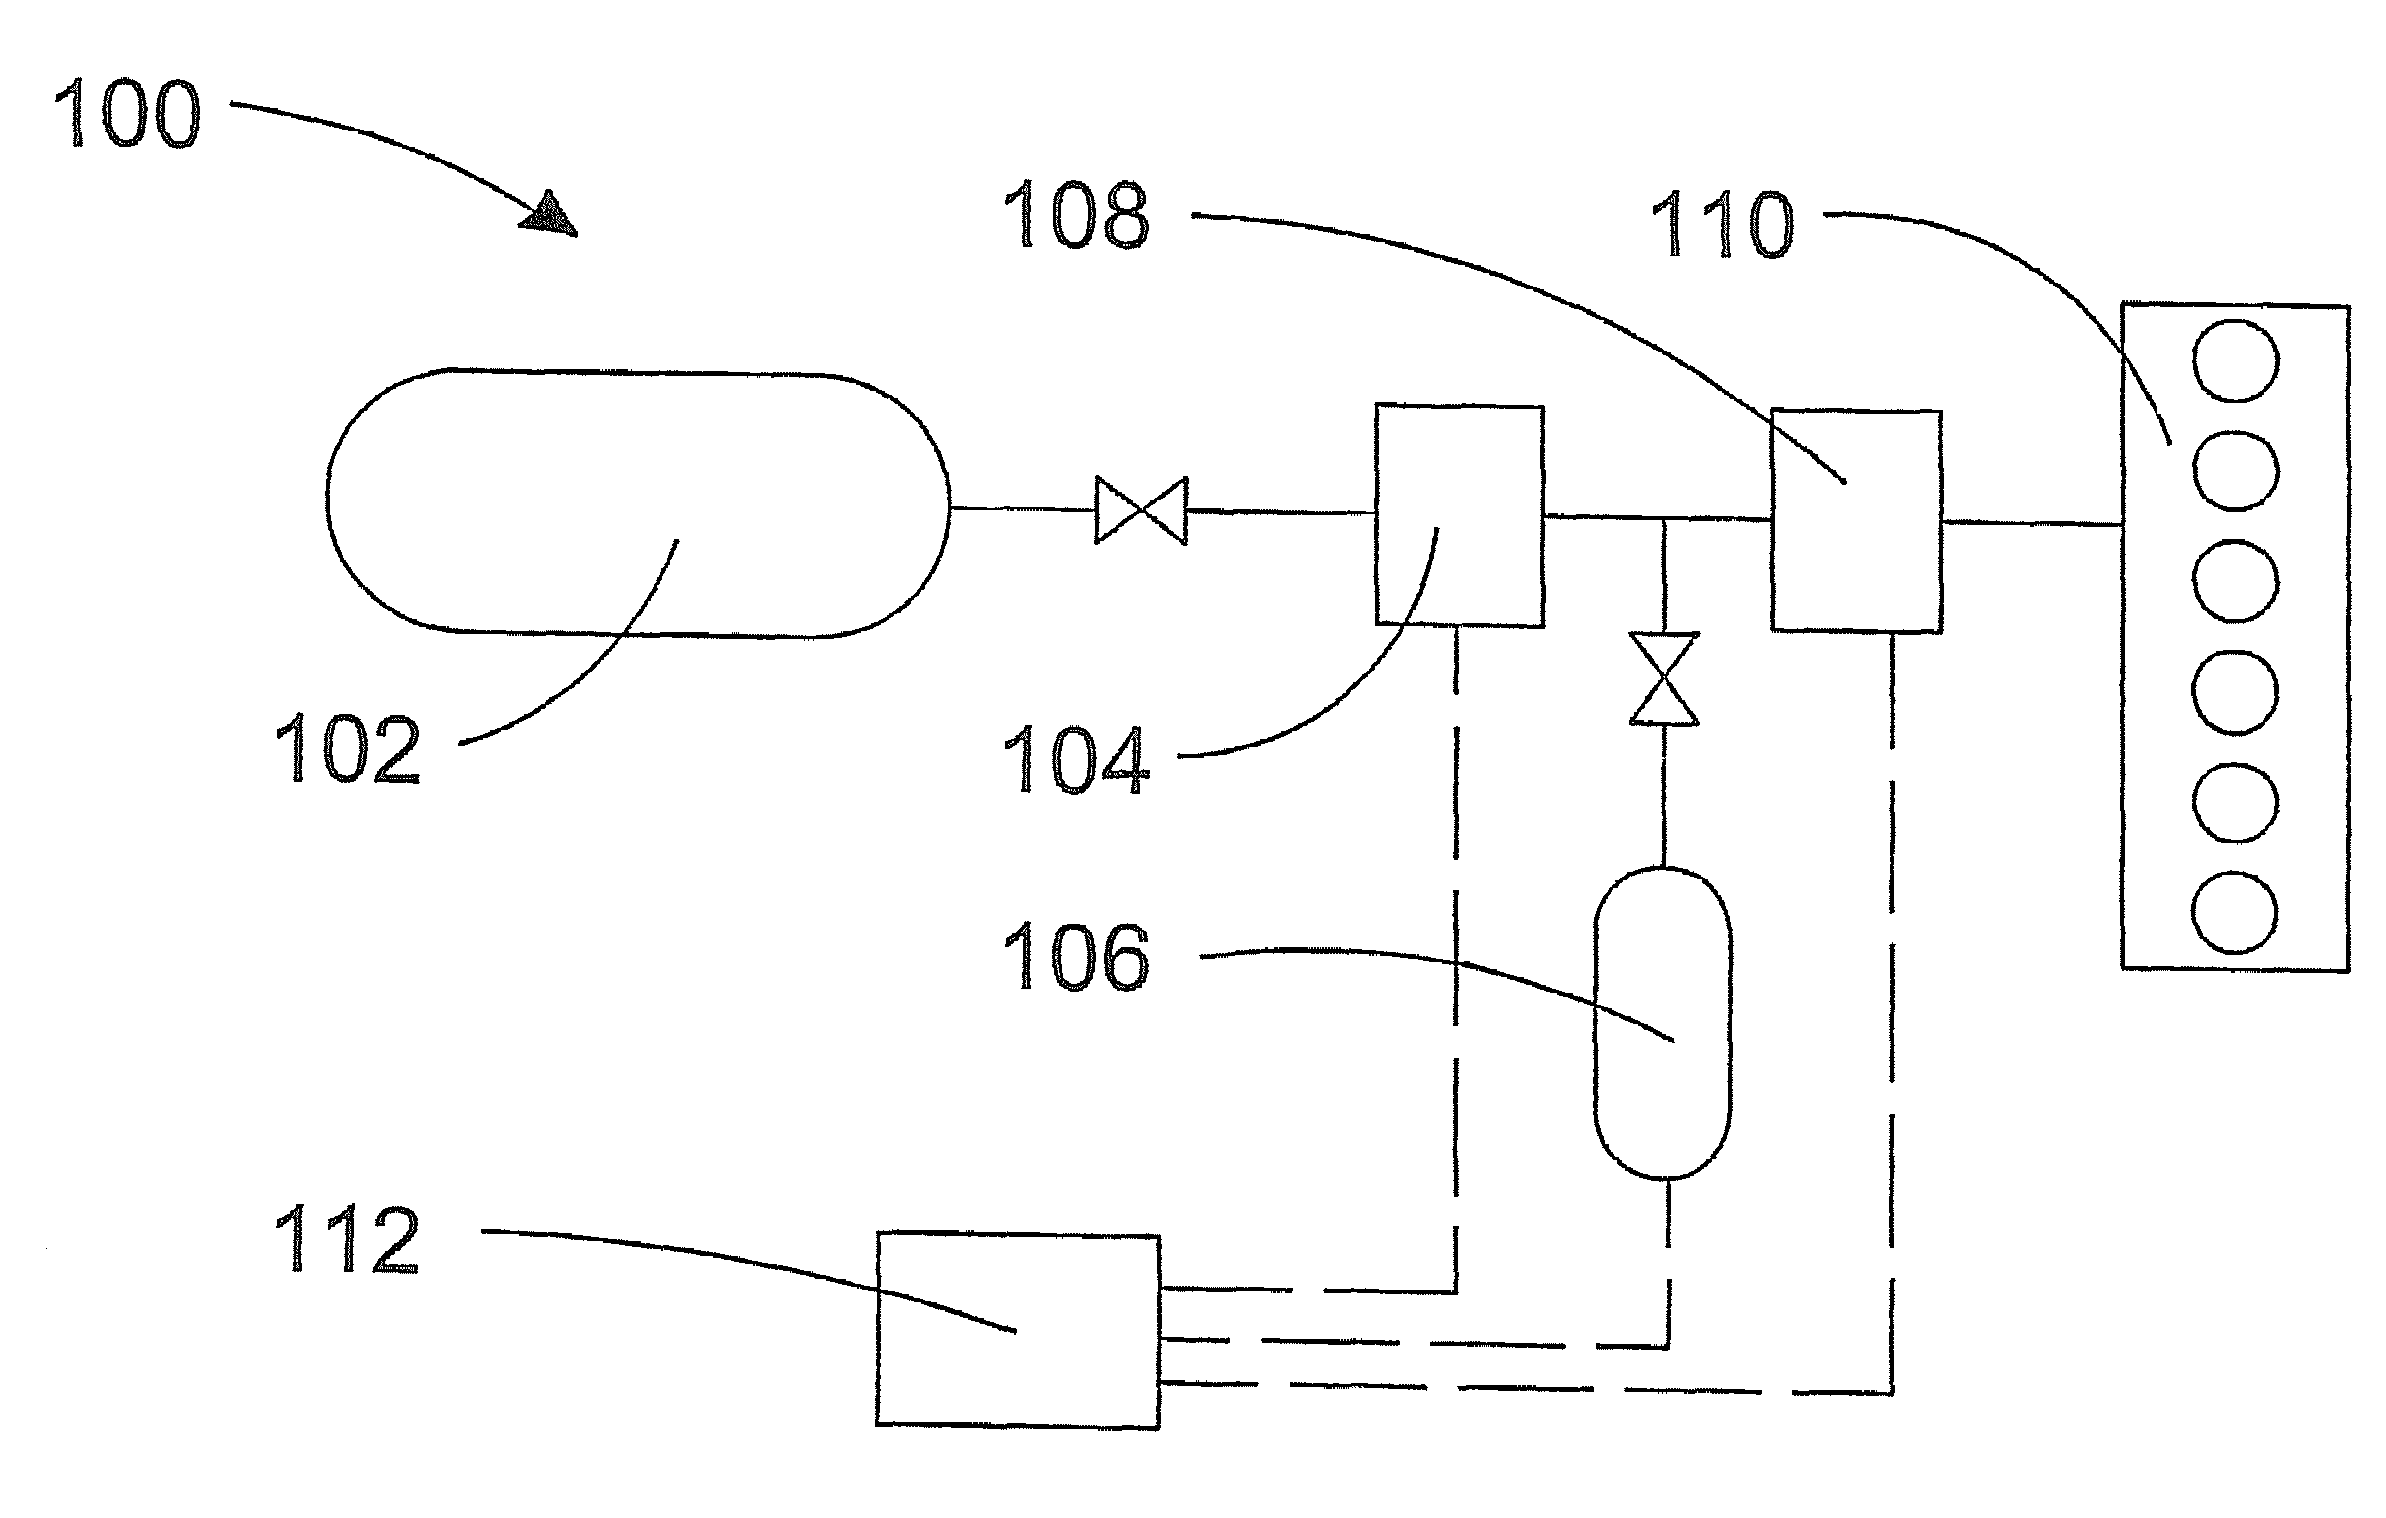 High pressure gaseous fuel supply system for an internal combustion engine and a method of sealing connections between components to prevent leakage of a high pressure gaseous fuel